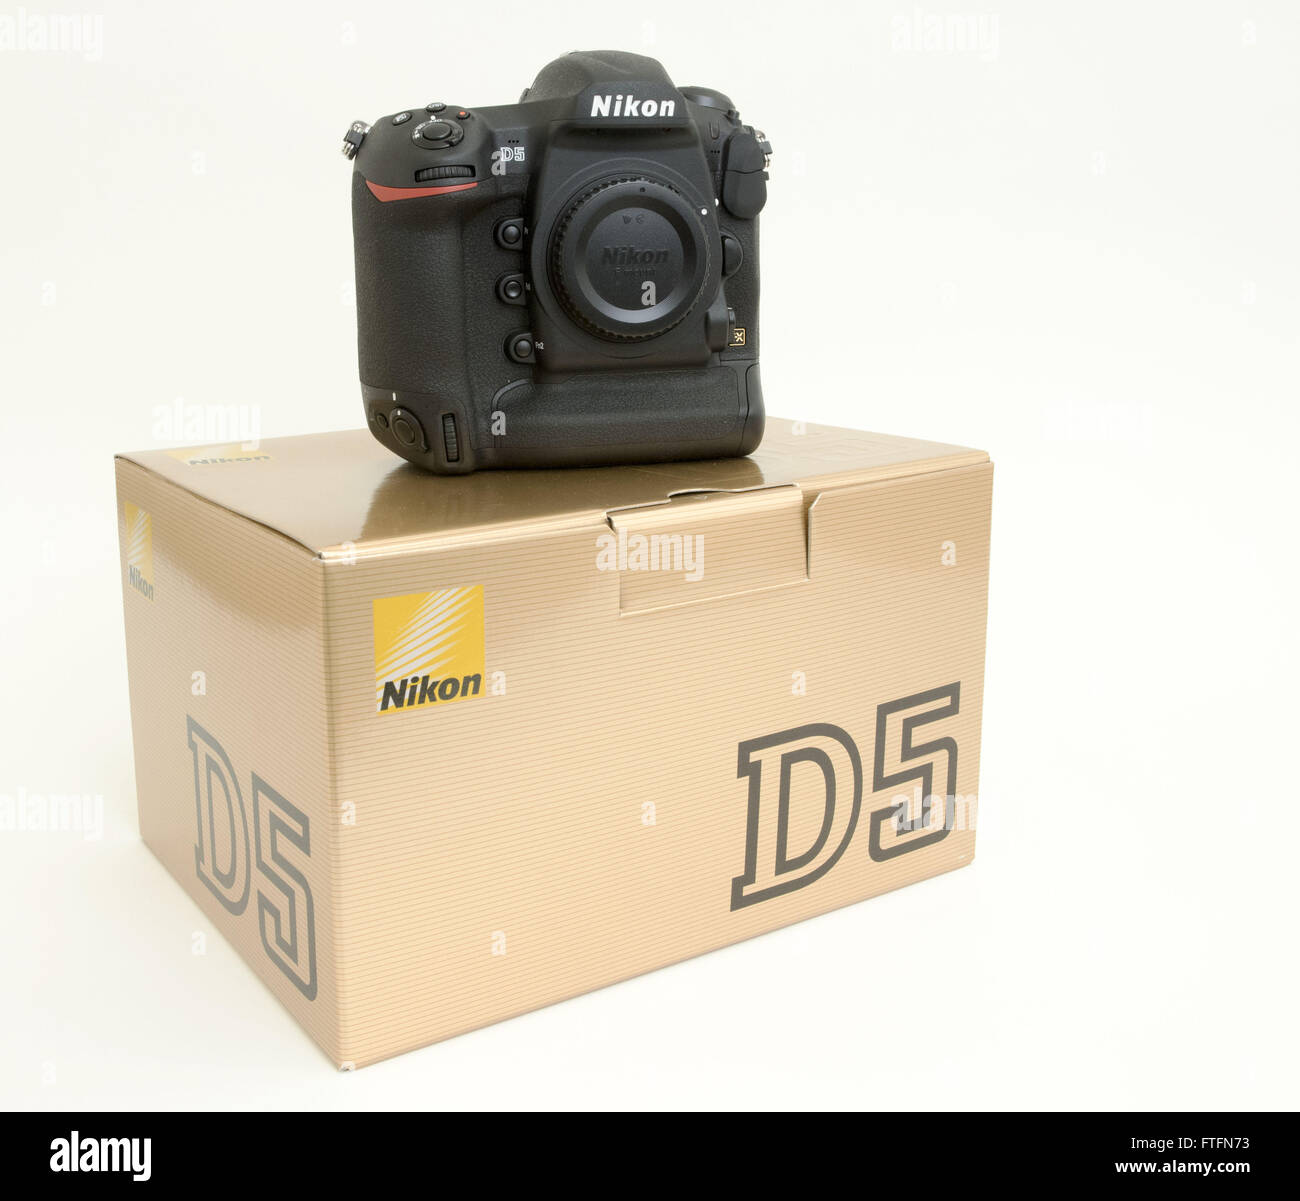 Los Angeles, California, USA. 27th Mar, 2016. Camera maker Nikon began to release and ship out the company's latest professional grade camera body on Wednesday March 23, 2016, shipping first to their NPS, or Nikon Professional Service members. The cameras features upgrades over the latest D4s with a lager digital file at 20 megs, faster frame rate at 12 frames per second and increased sensitivity in ISO ratings. The camera retails for a list price of $6,499.95. © David Bro/ZUMA Wire/Alamy Live News Stock Photo